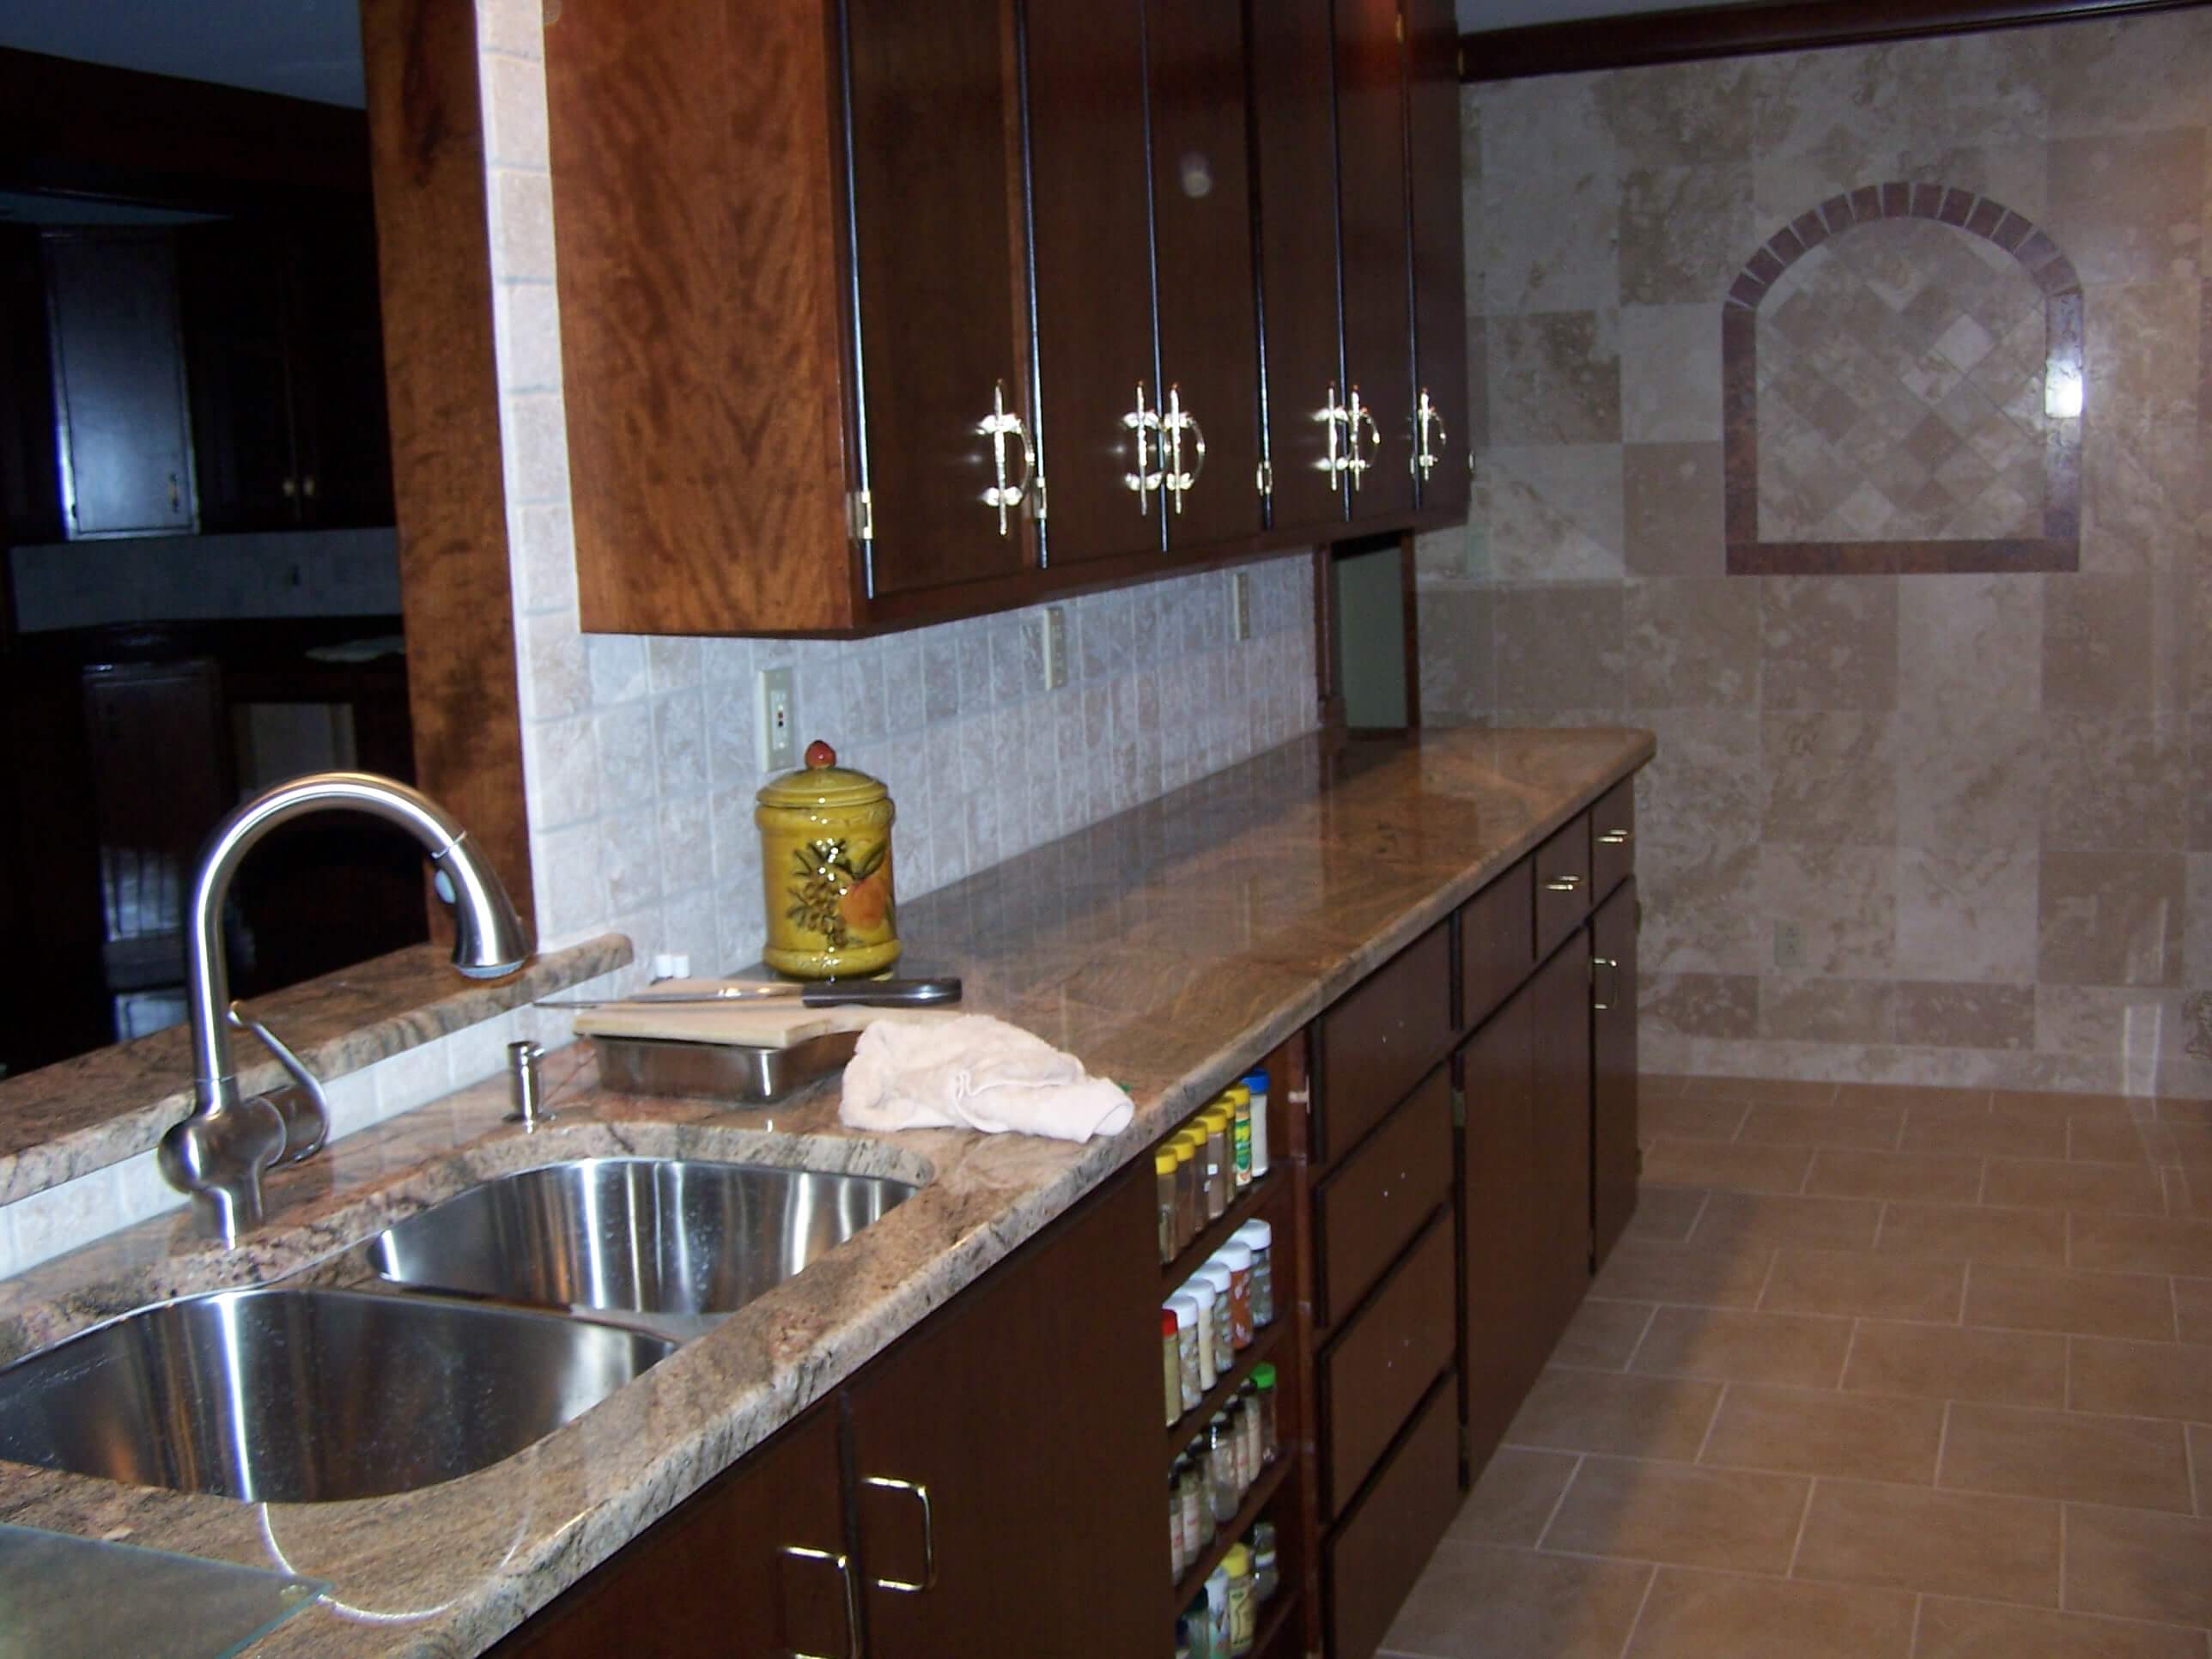 Granite Counter and Marble flooring and walls